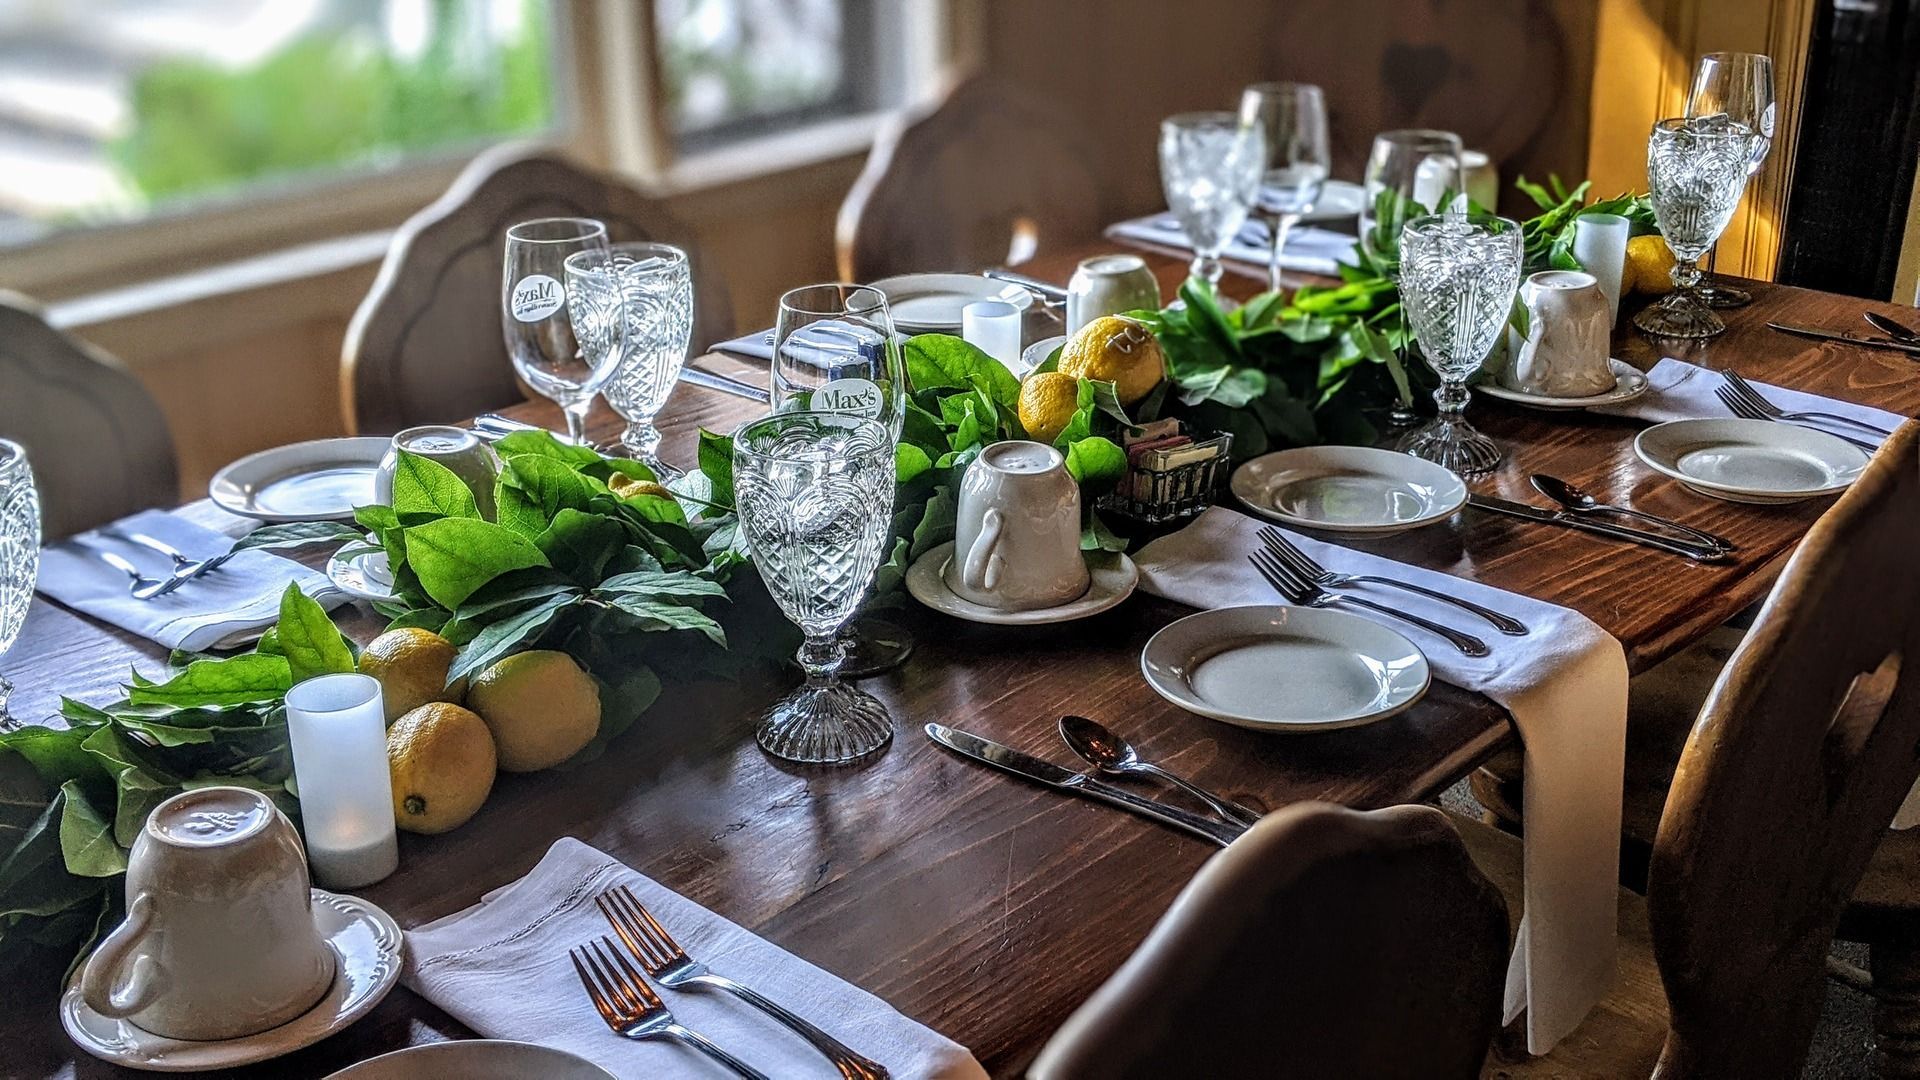 A long wooden table is set for a dinner party with plates , cups , glasses and utensils.